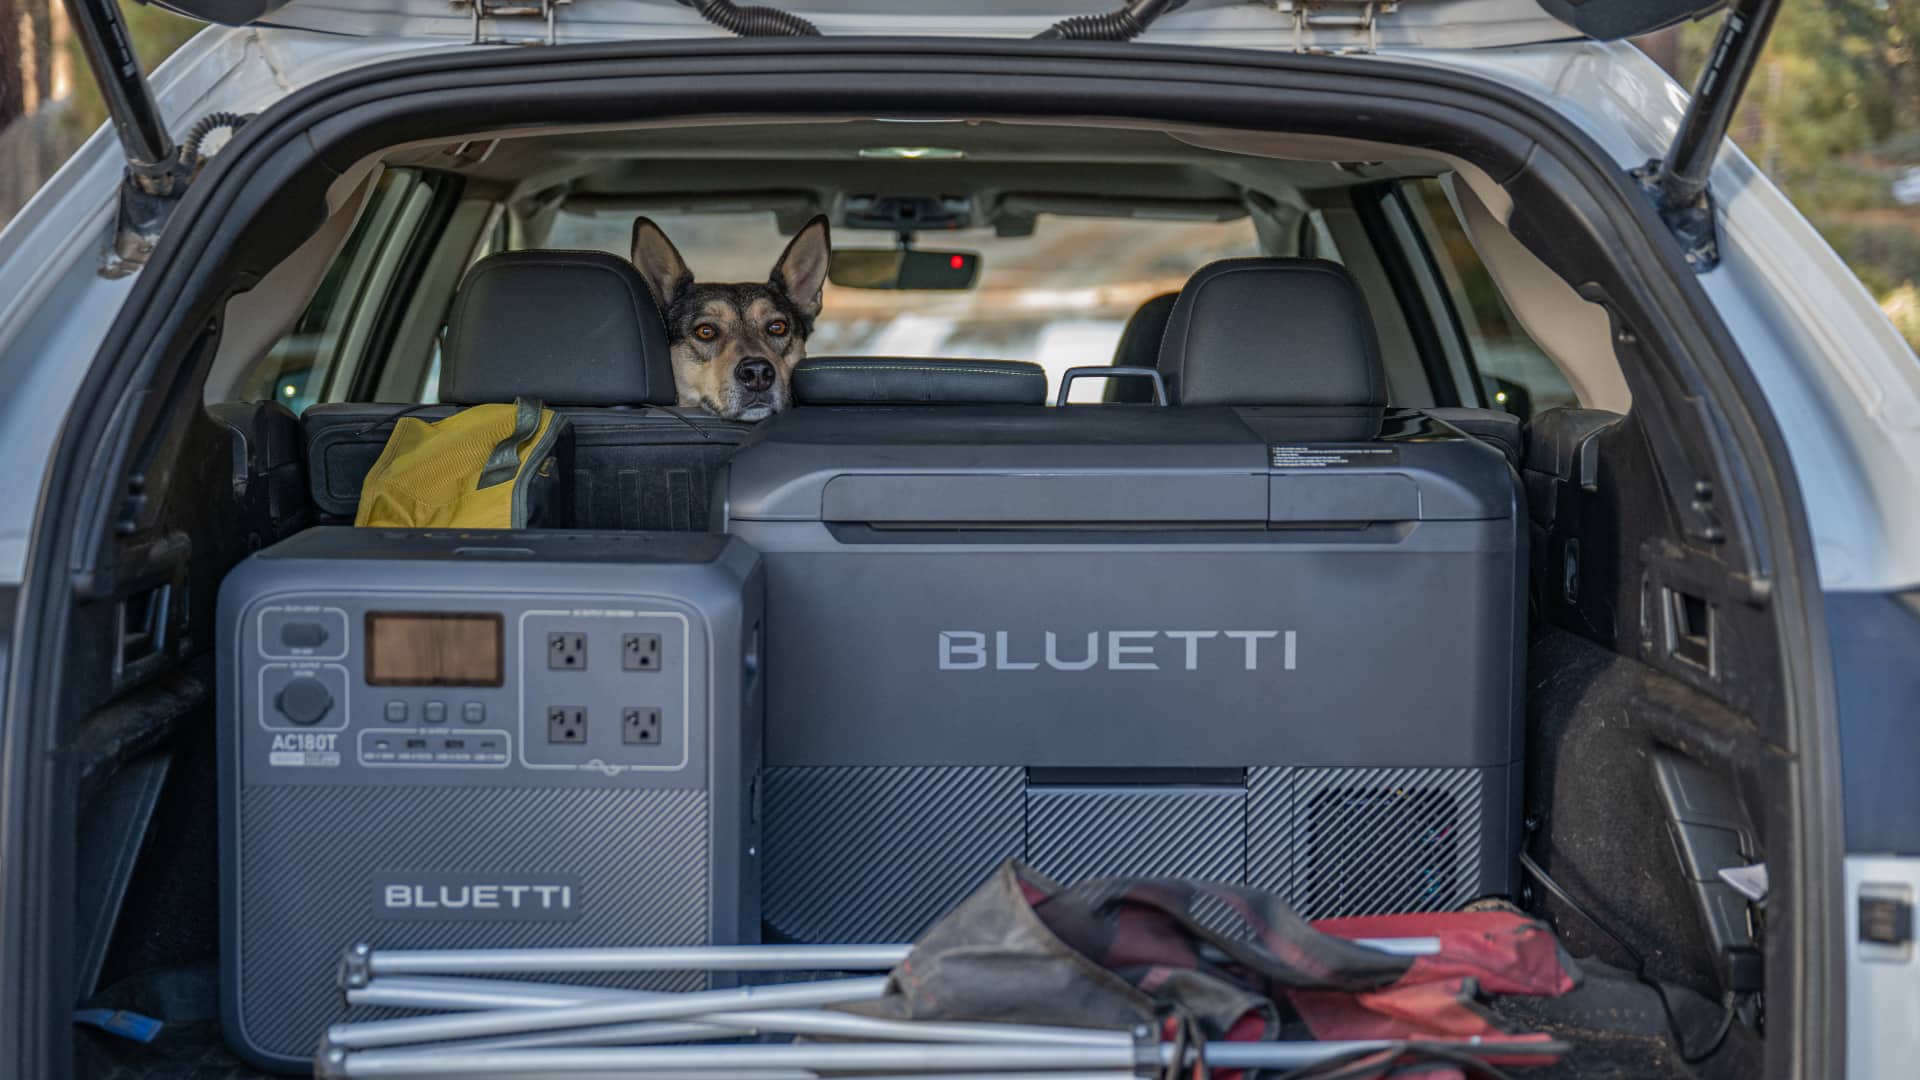 Bluetti's AC180T portable power station and MultiCooler fridge in the trunk of a pickup truck, with a dog sitting in the driver's seat and looking intently directly at the camera